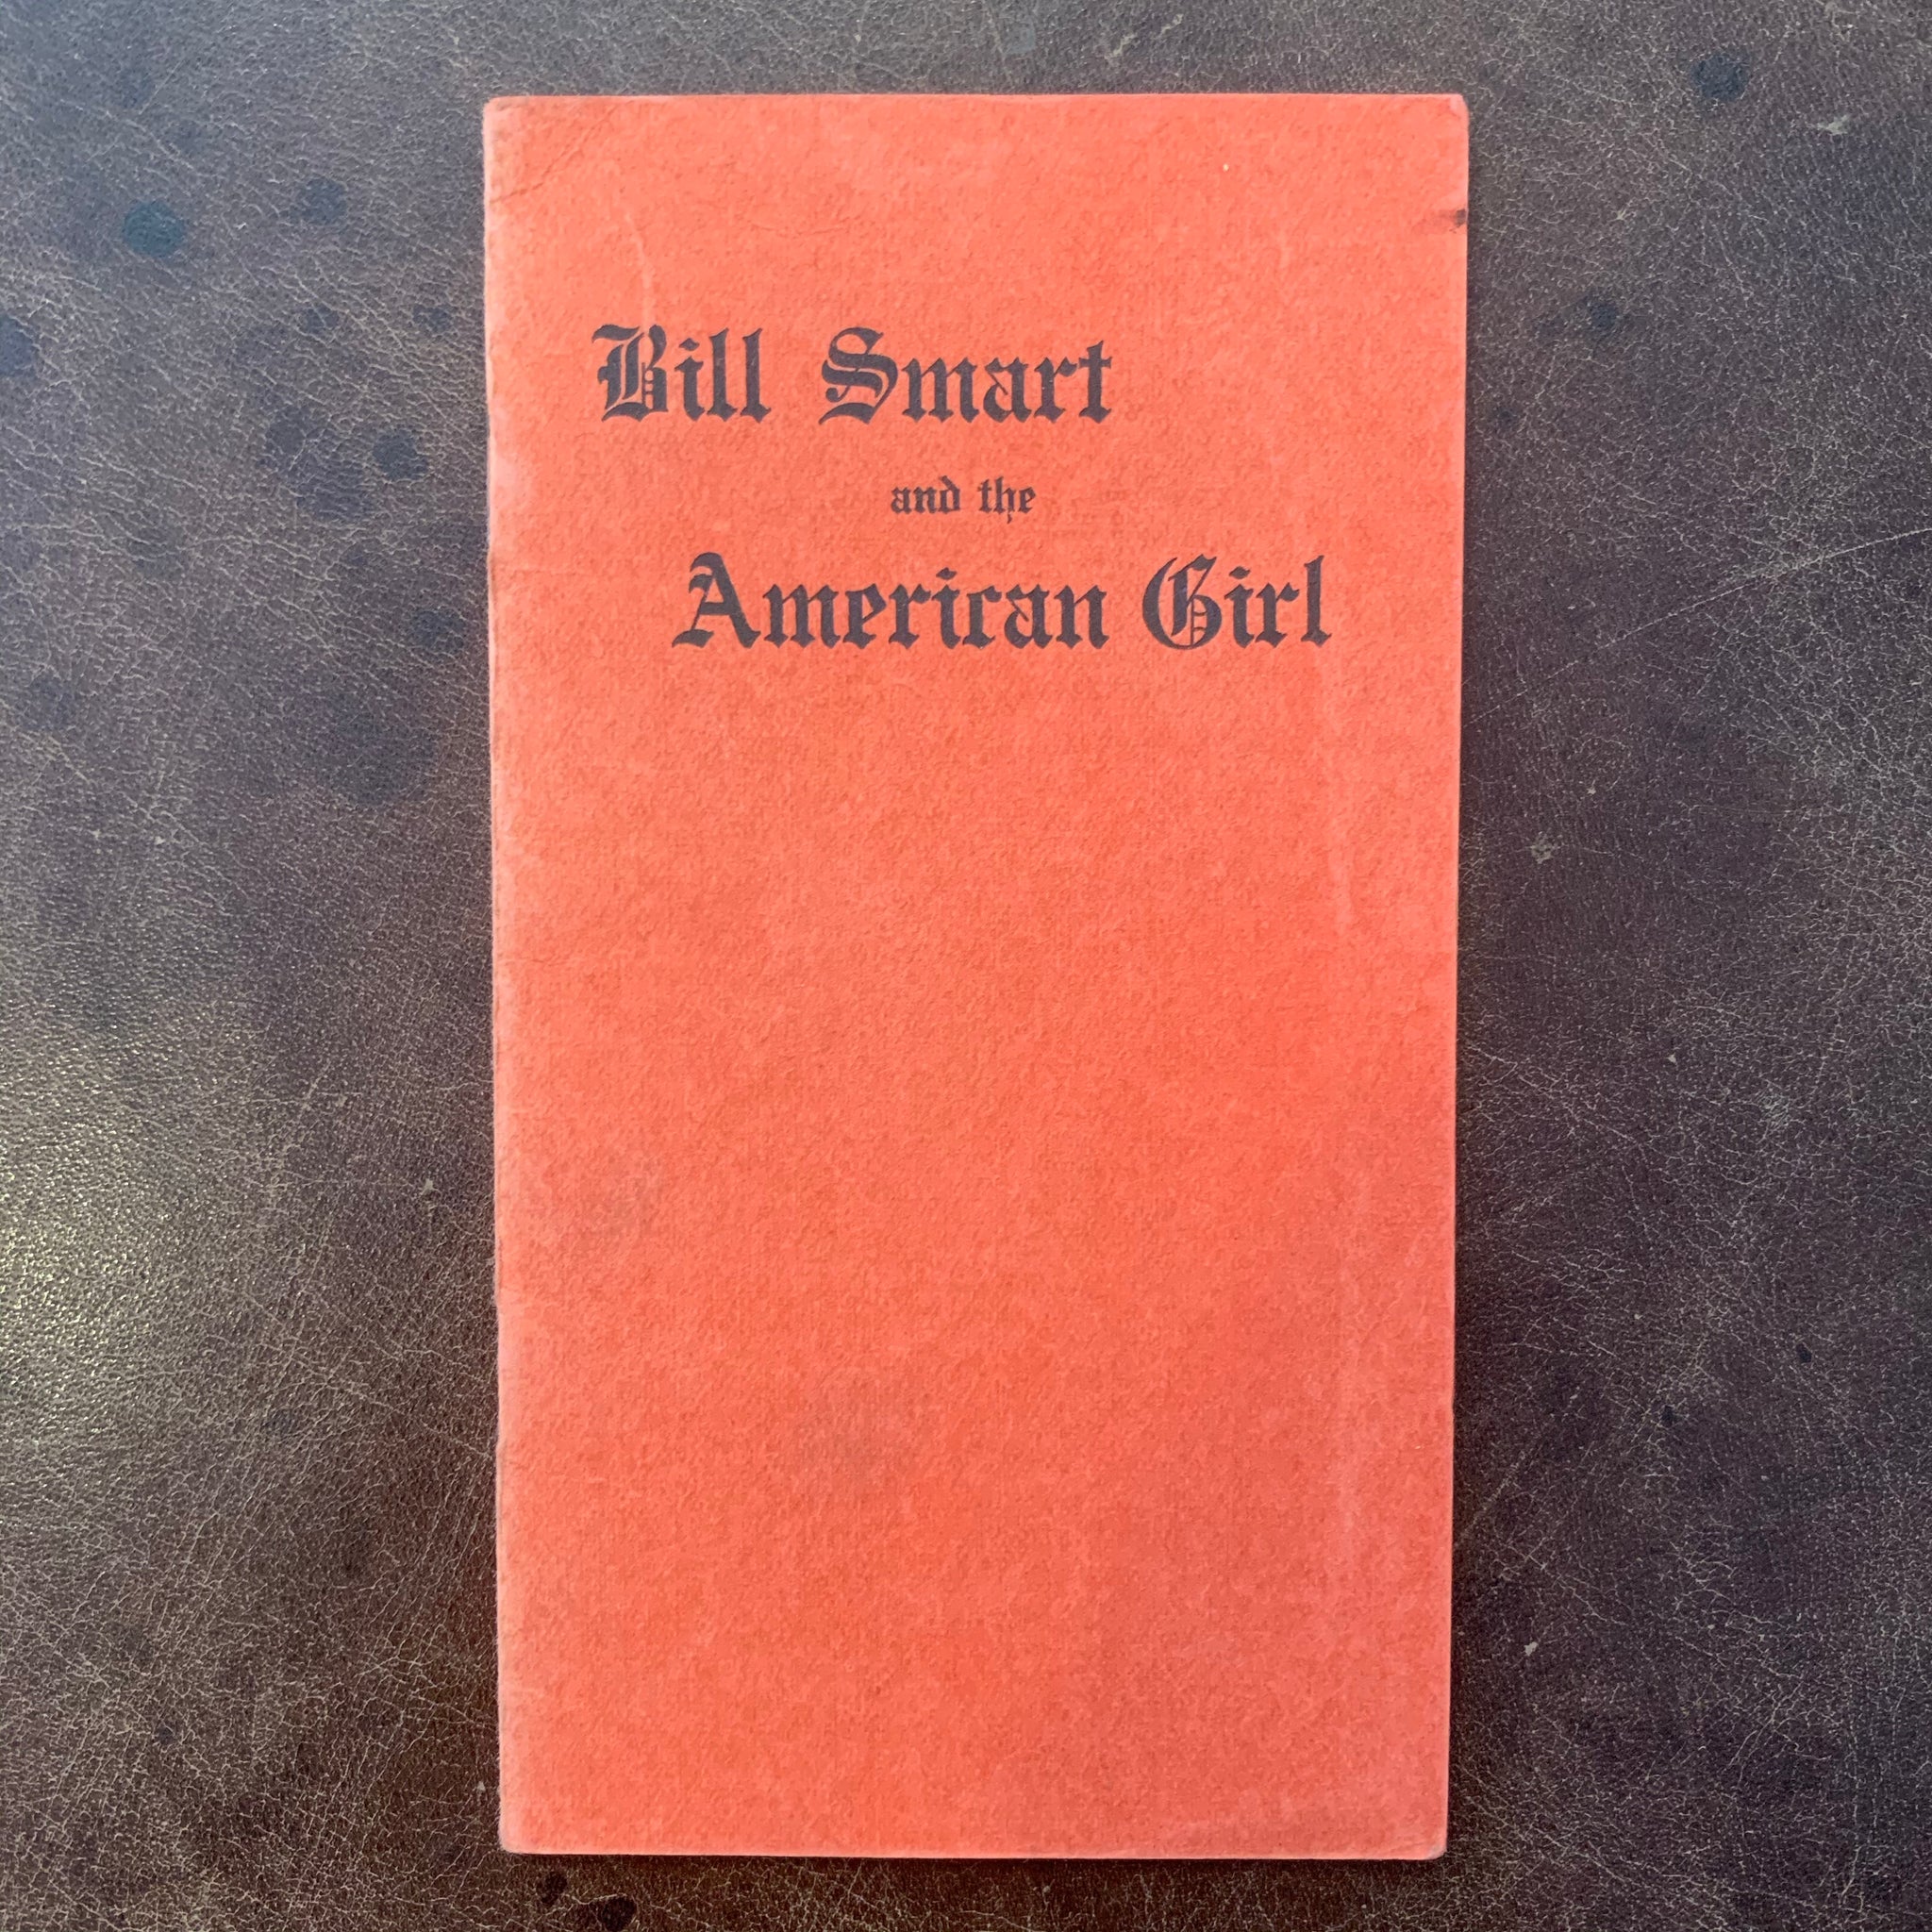 Bill Smart and the American Girl